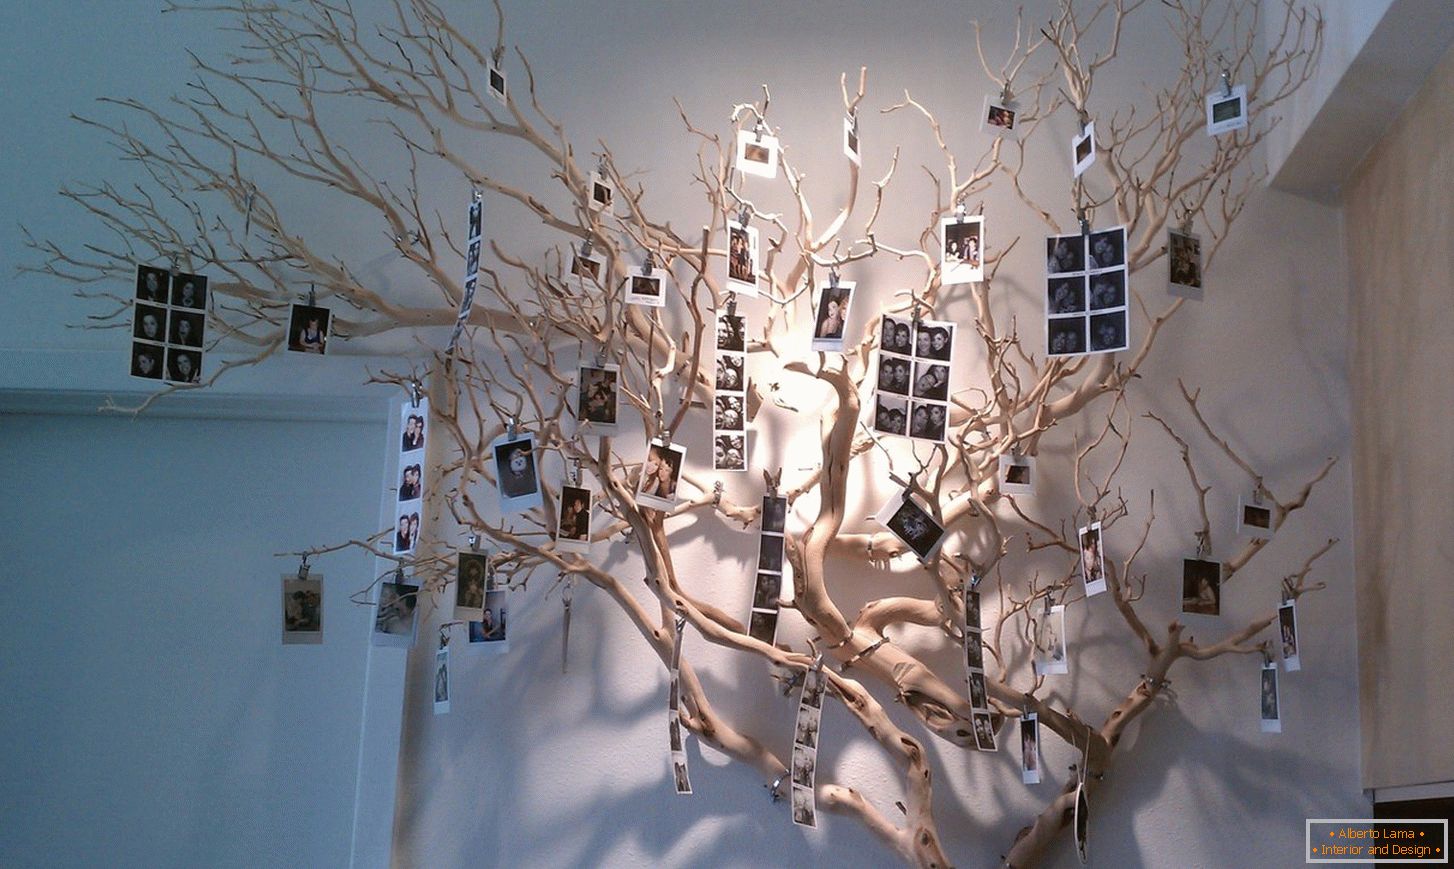 Decor from branches